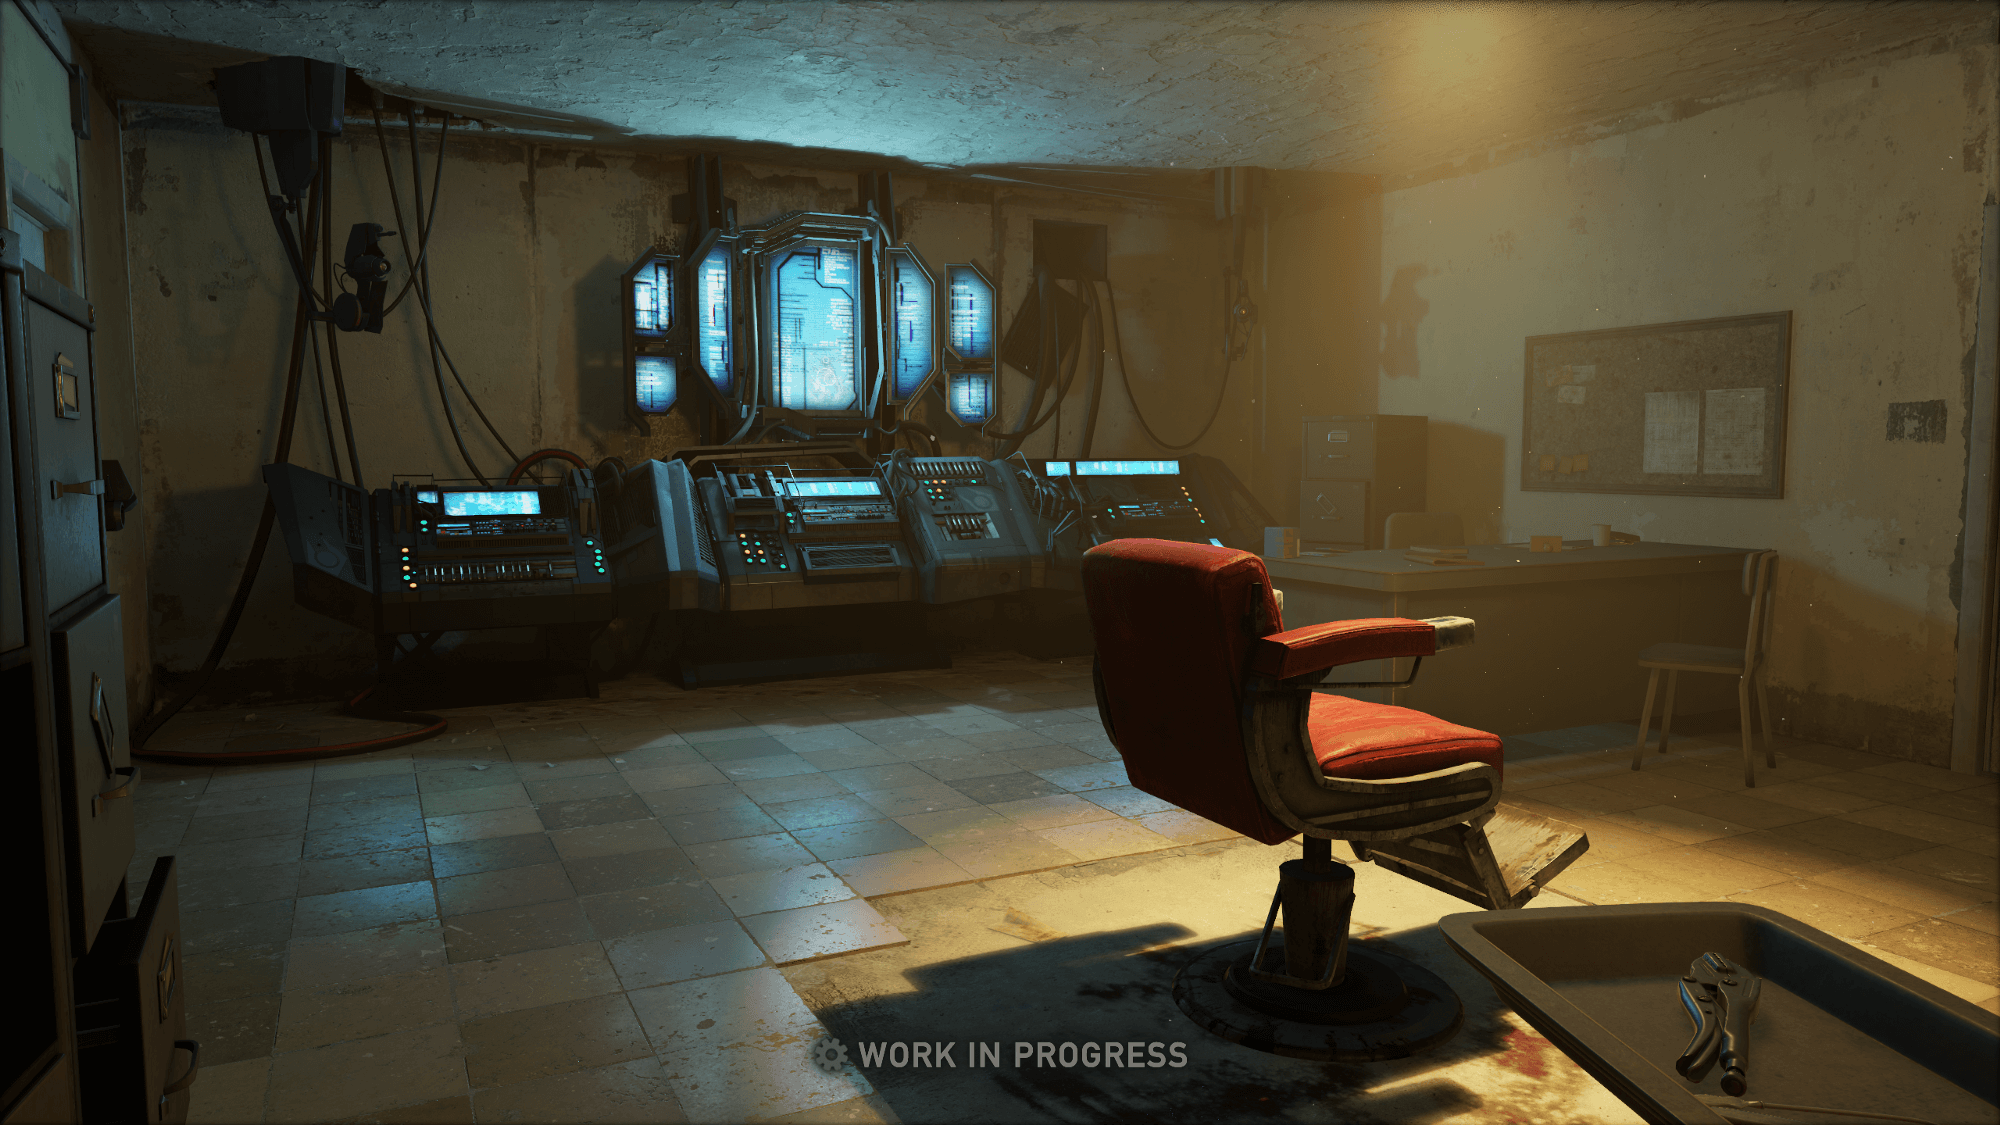 The Barney reveal room from Half-Life 2, remade in Half-Life: Alyx. The high-res red interrogation chair is lit by bright yellow light, contrasting with the cool metallic tones of the Combine control panel. This, and all the other screeenshots, are marked as works in progress.